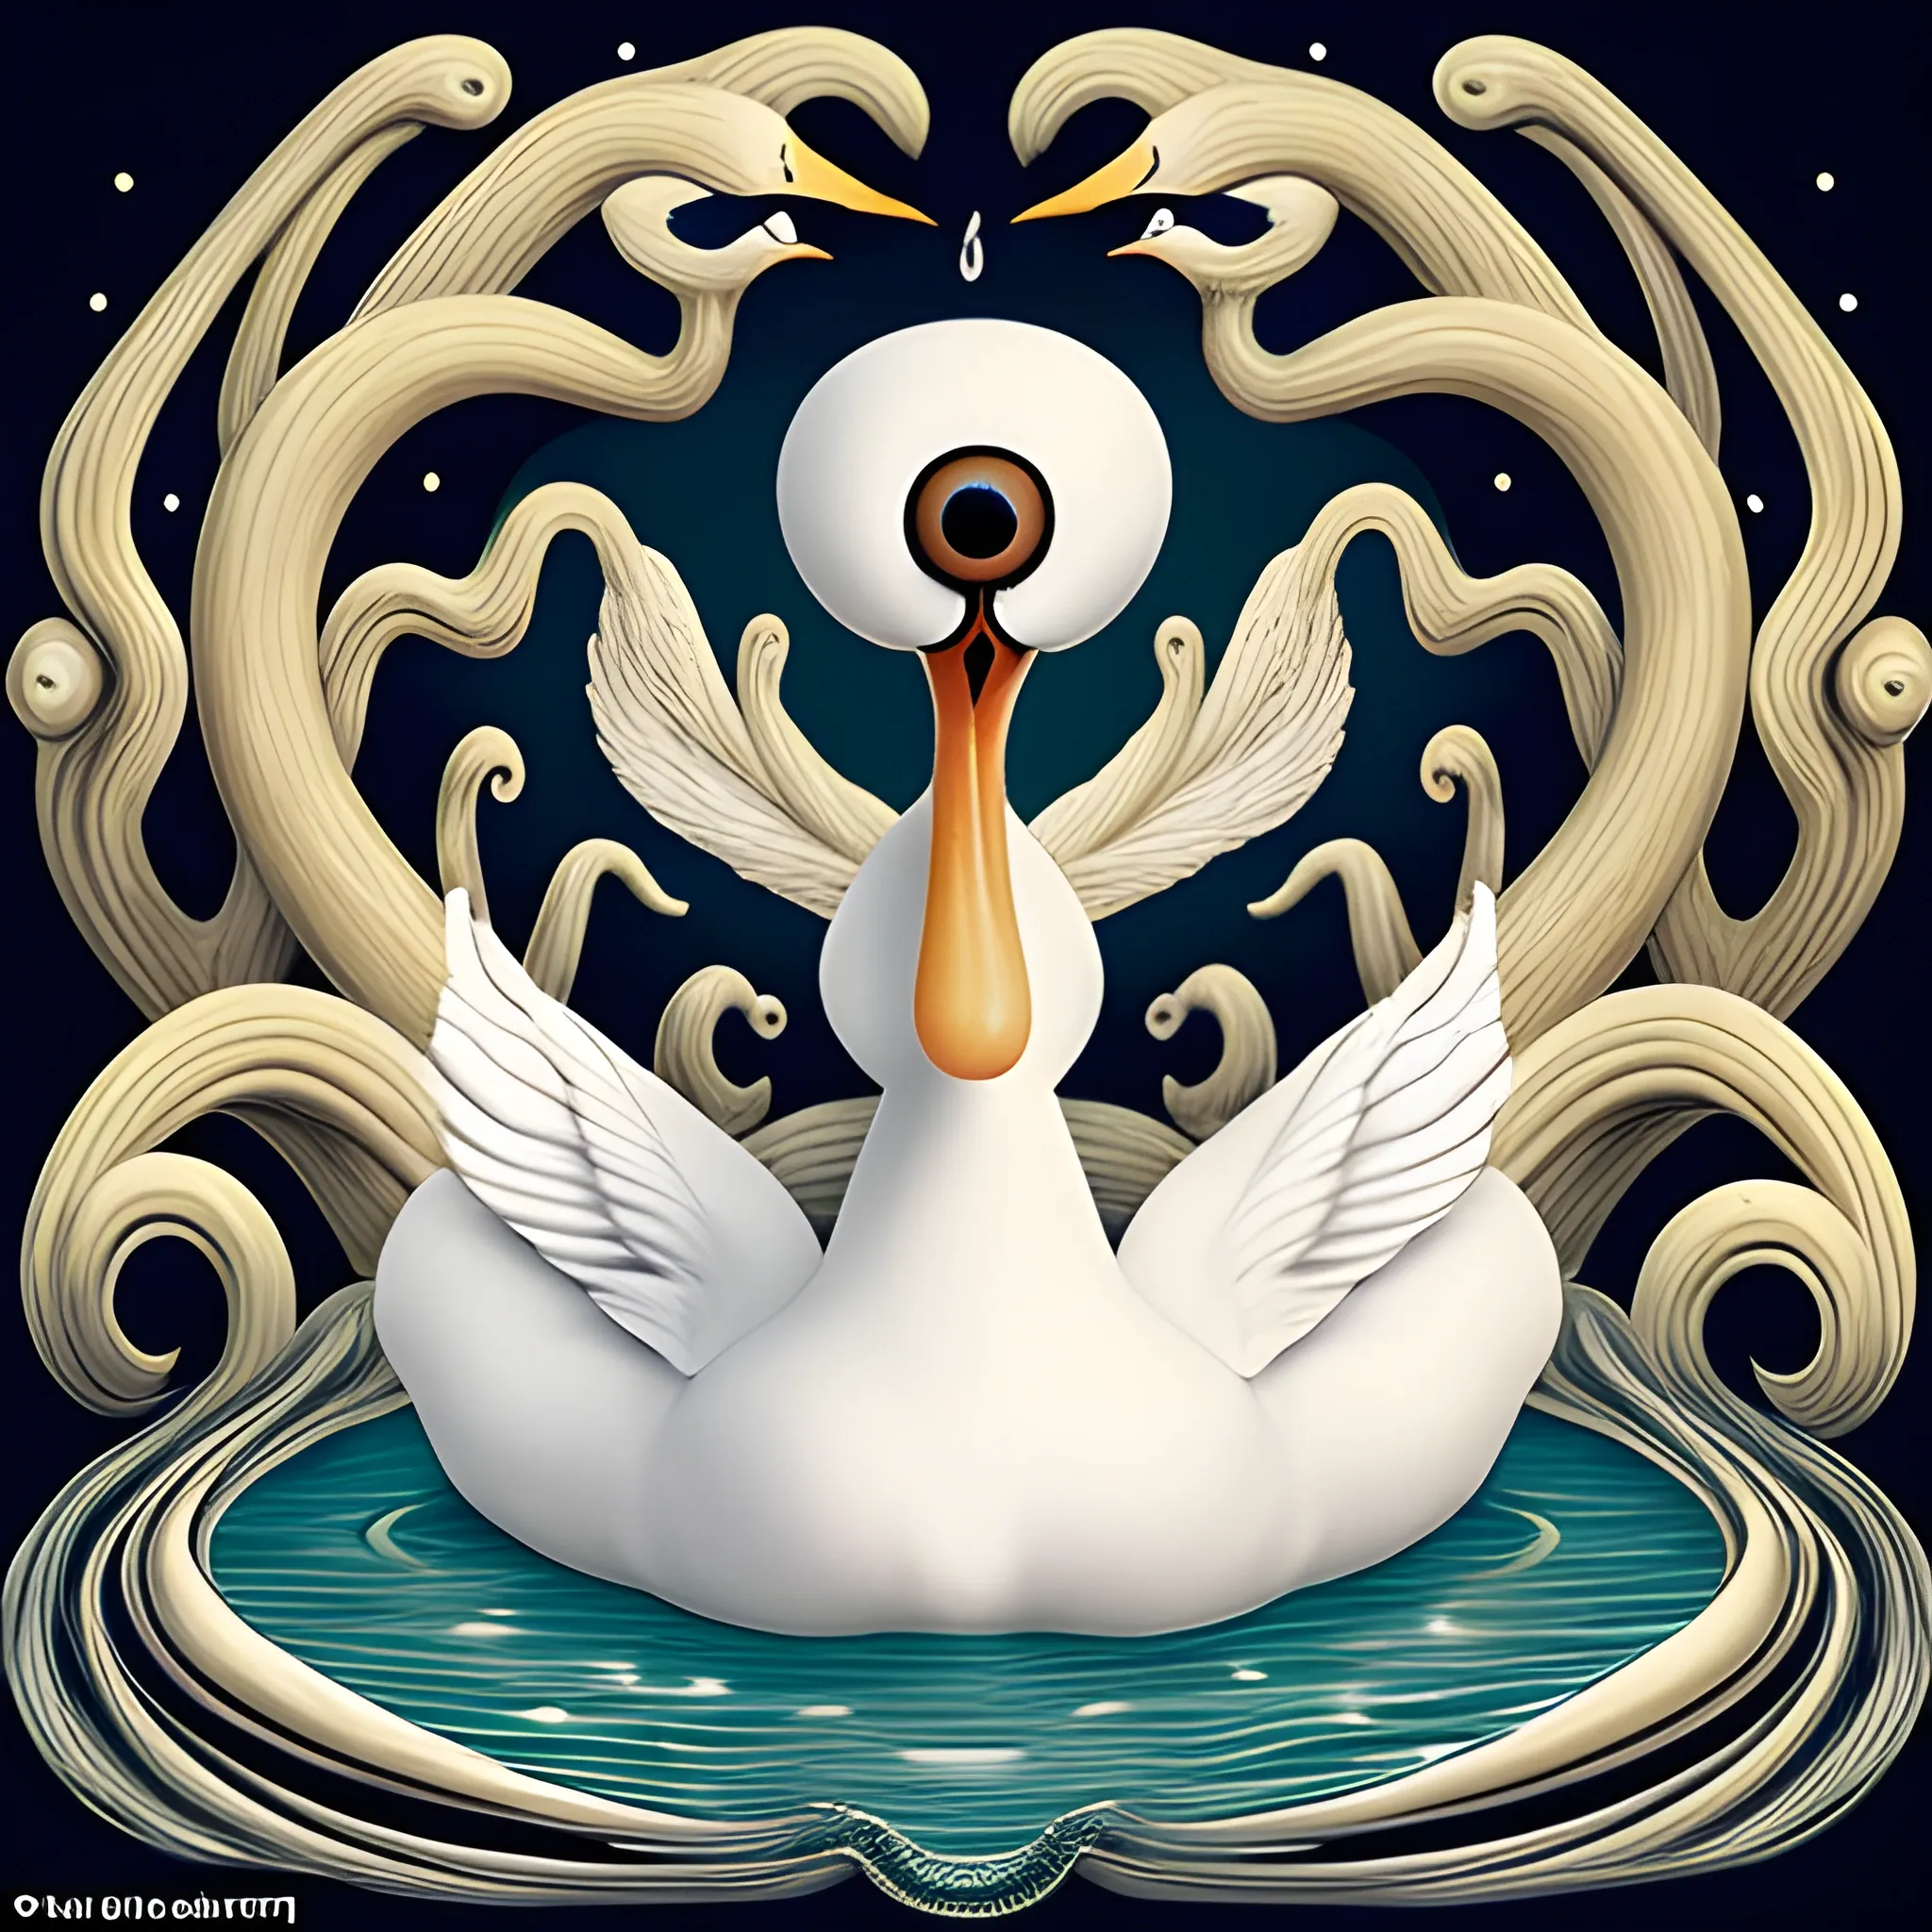 a swan with a giant eye on the body and that tears from that eye give rise to new swans, a surreal style, as if it were drawn in the 17th century